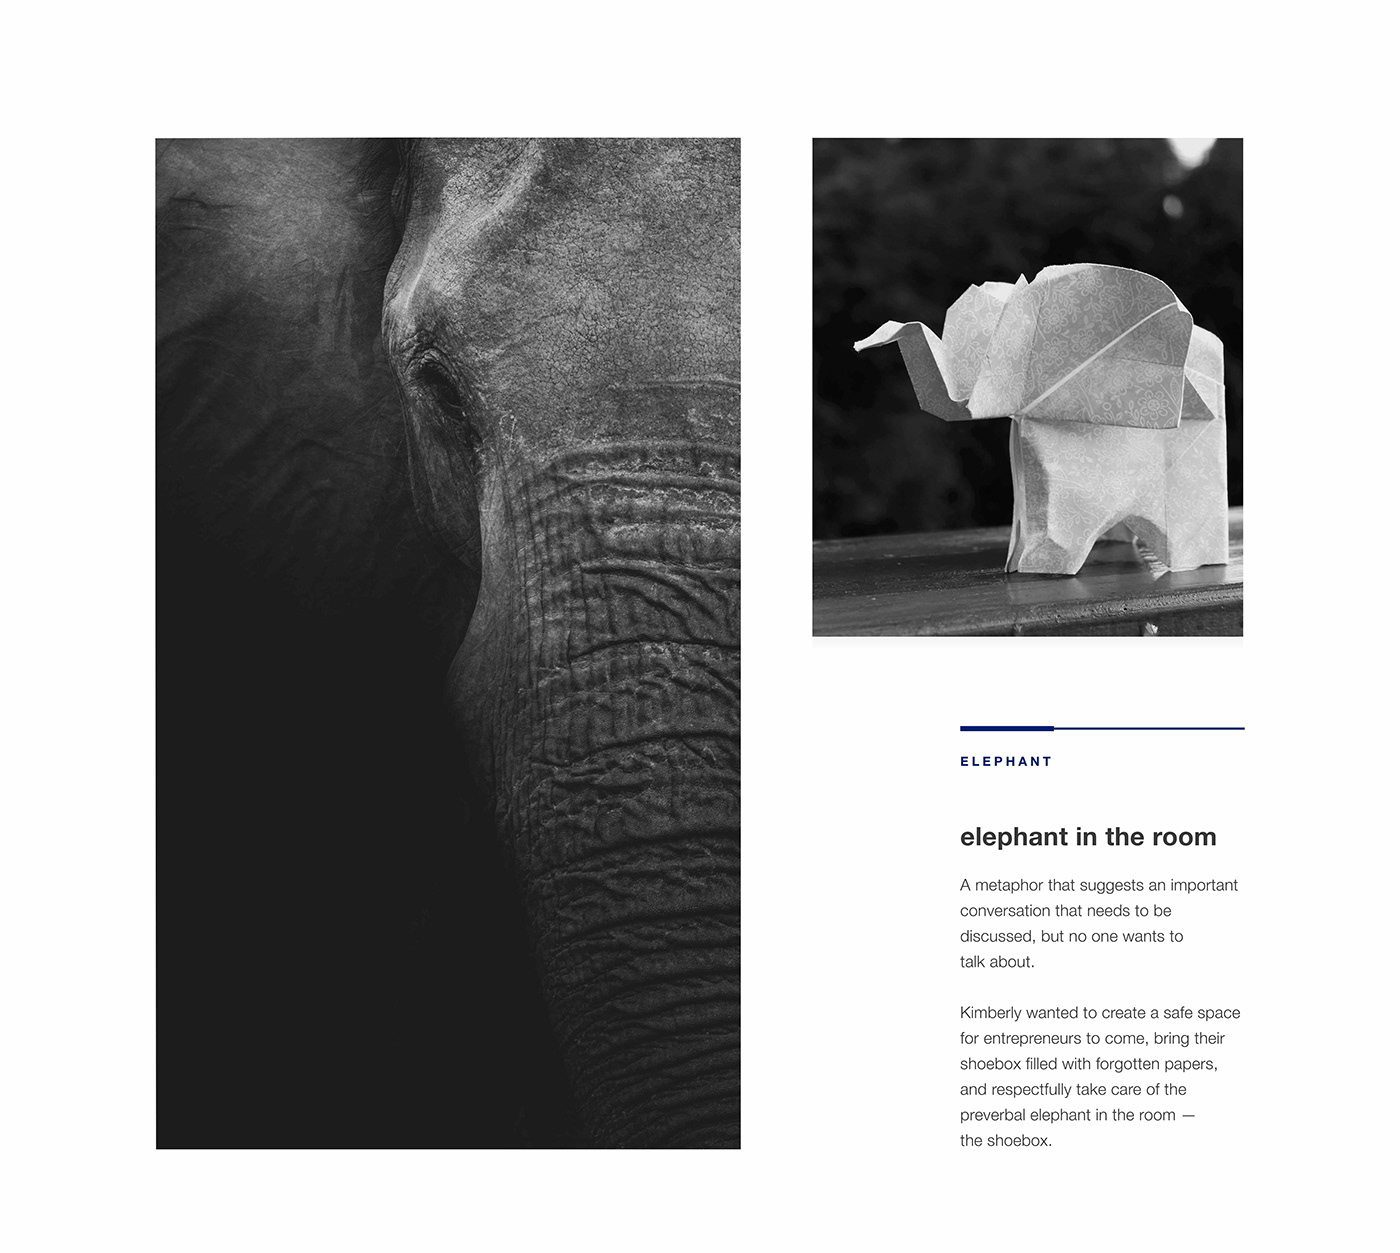 Images of a real elephant and elephant made from paper to inspire the design behind the logo.